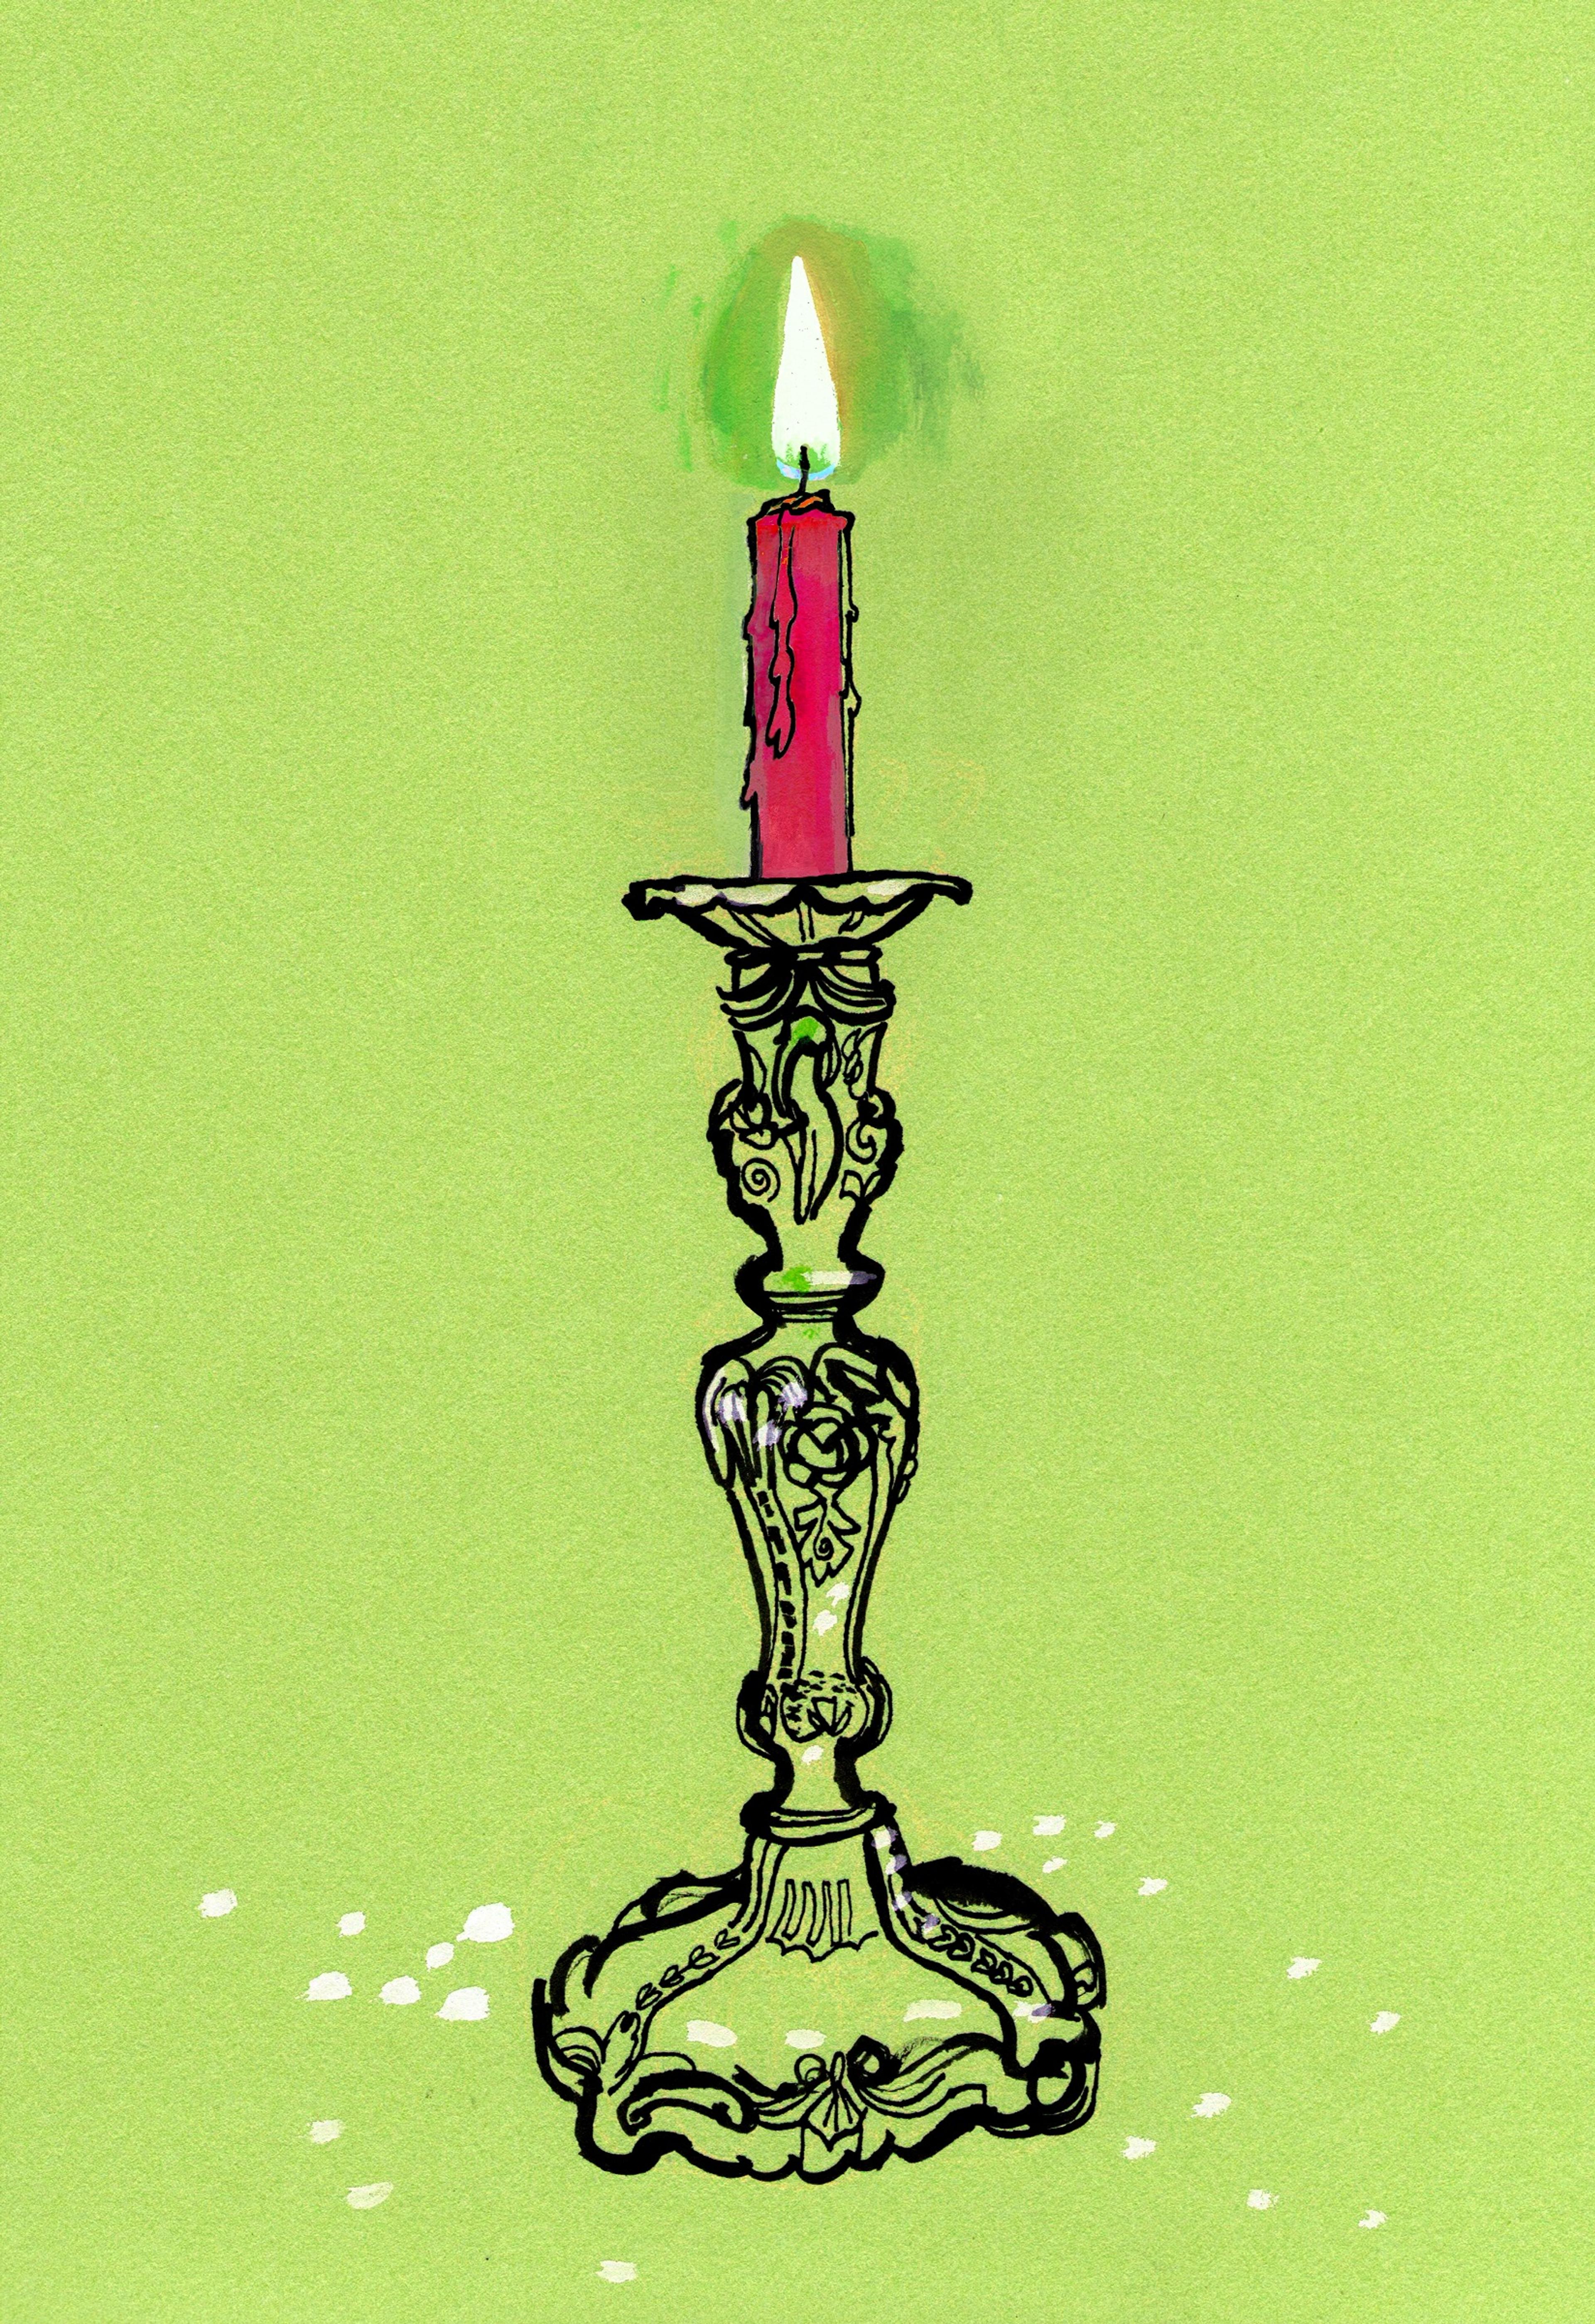 Illustration of an ornate candlestick against a green background